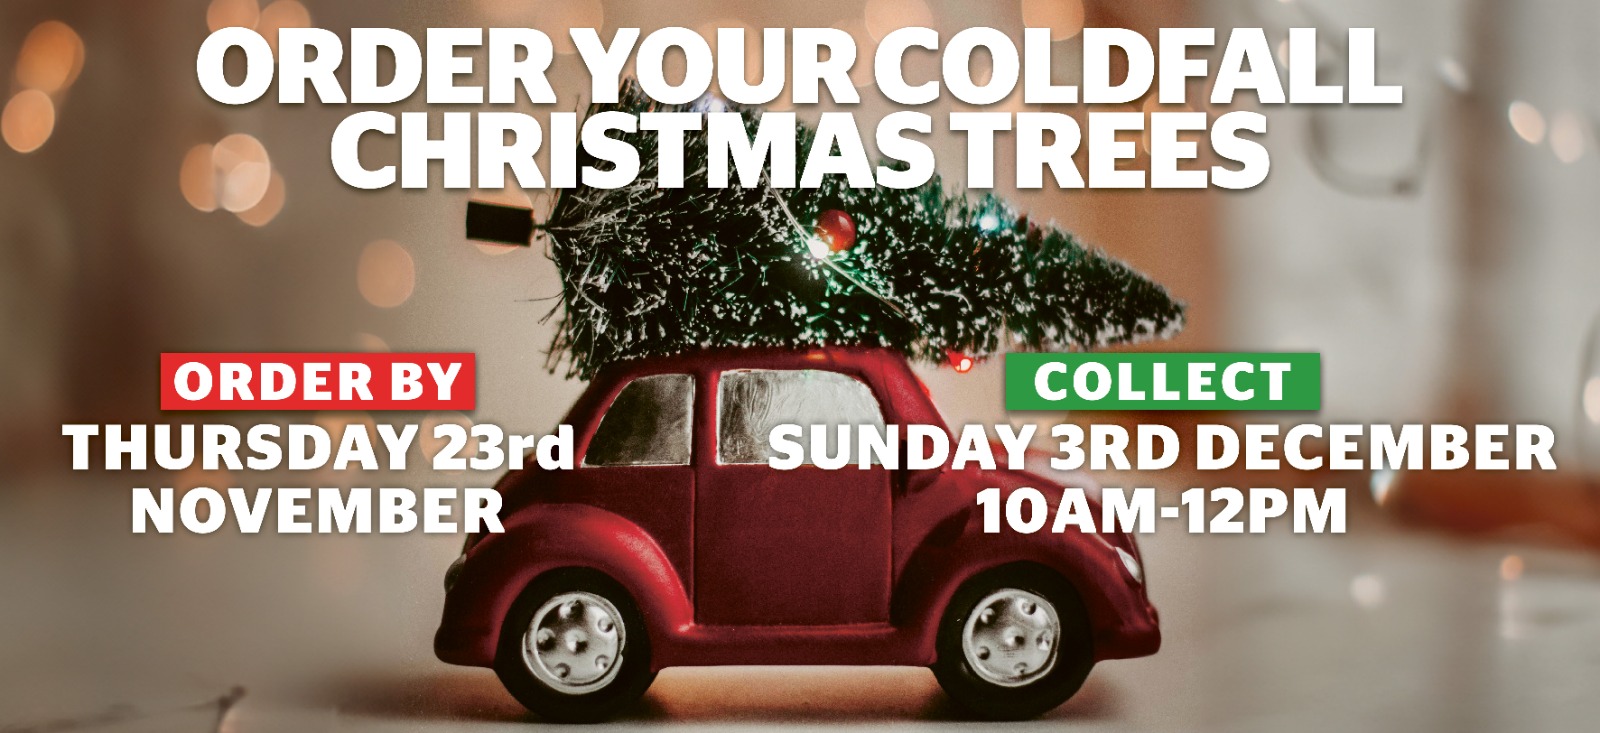 Collect your pre-ordered Coldfall Christmas Trees 